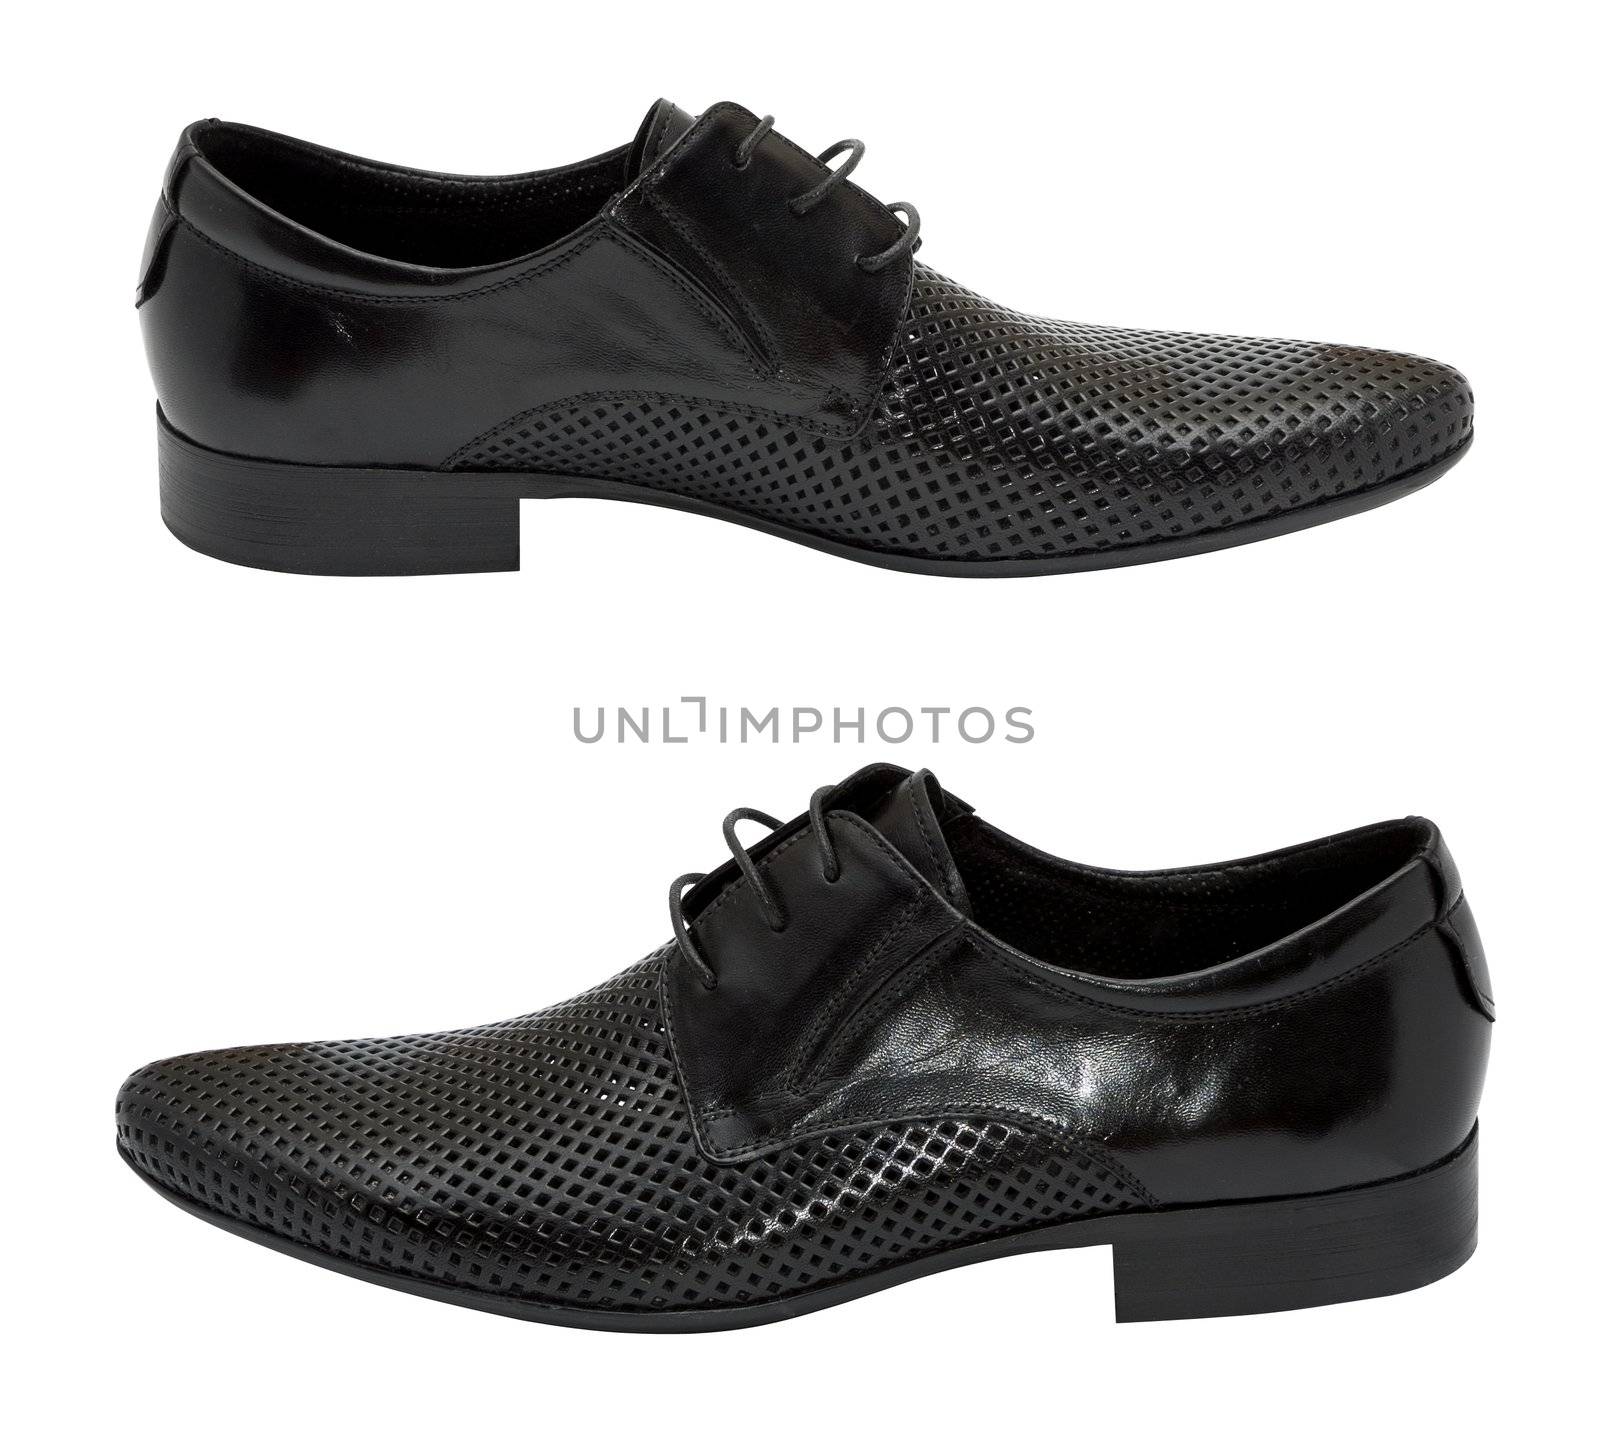 Pair of black leather summer shoes with holes for better ventilation